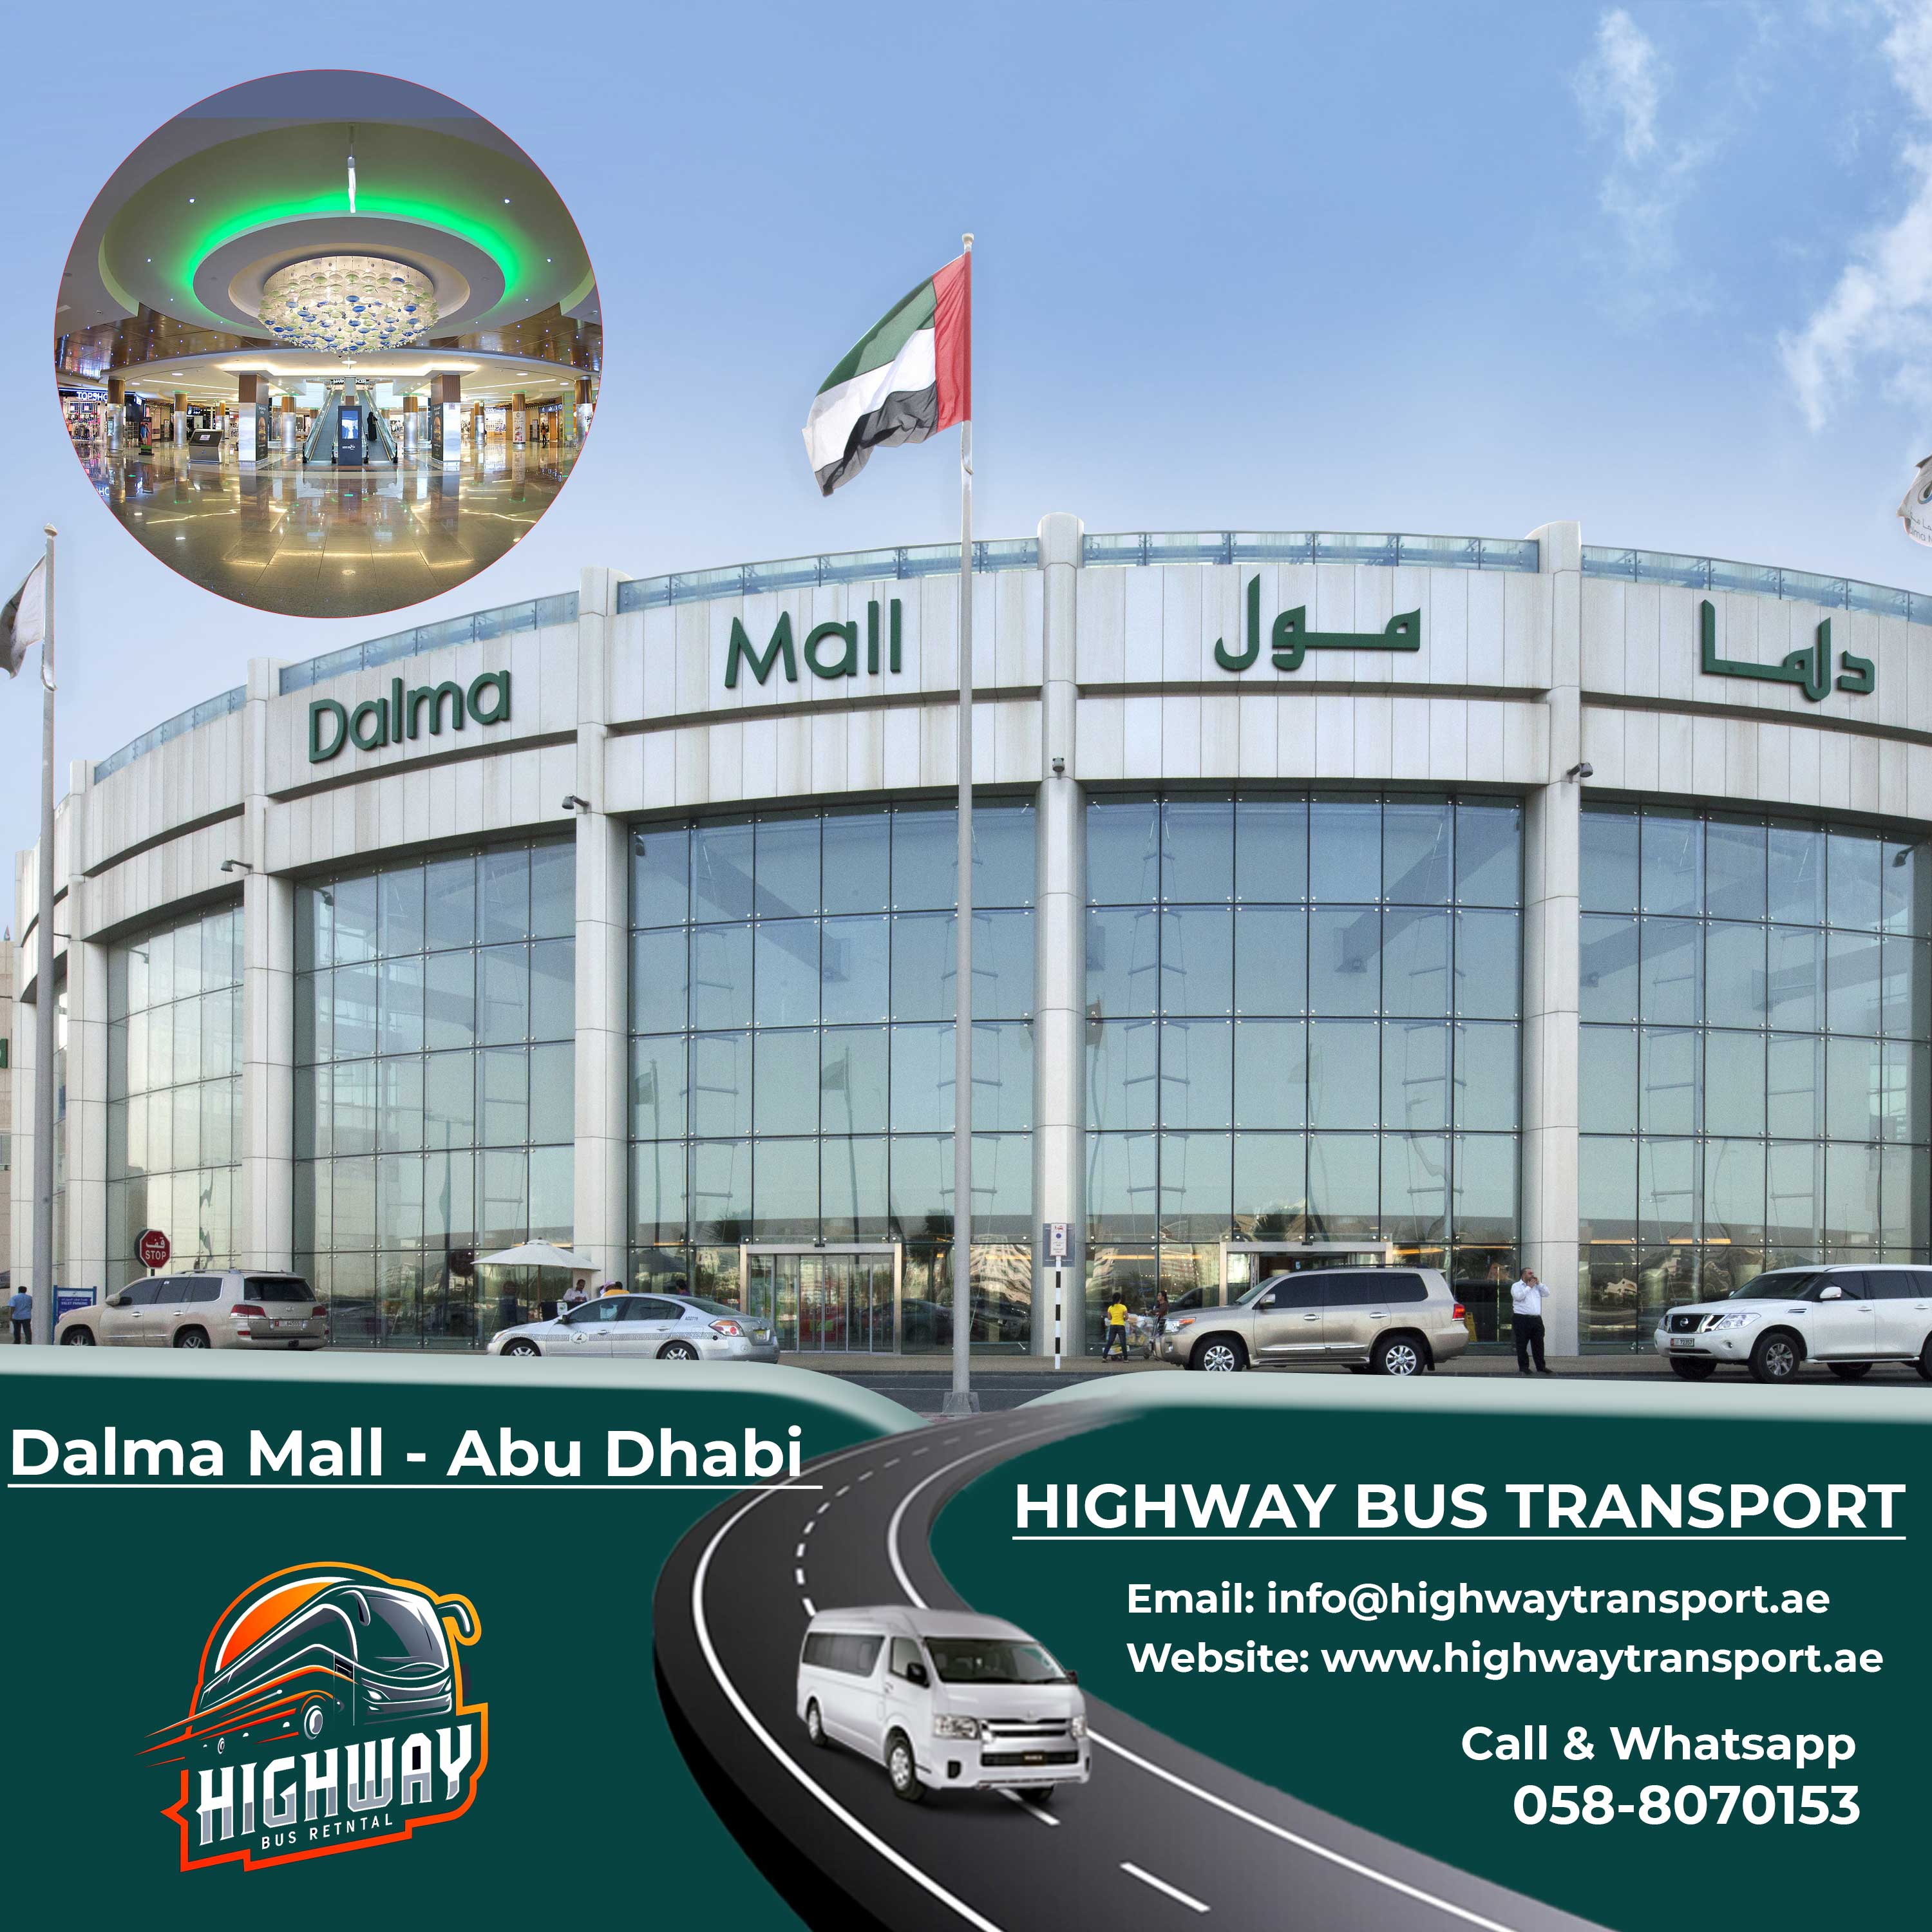 Shopping at Dalma Mall - browse shops, check movie times, attend special events, and view opening hours